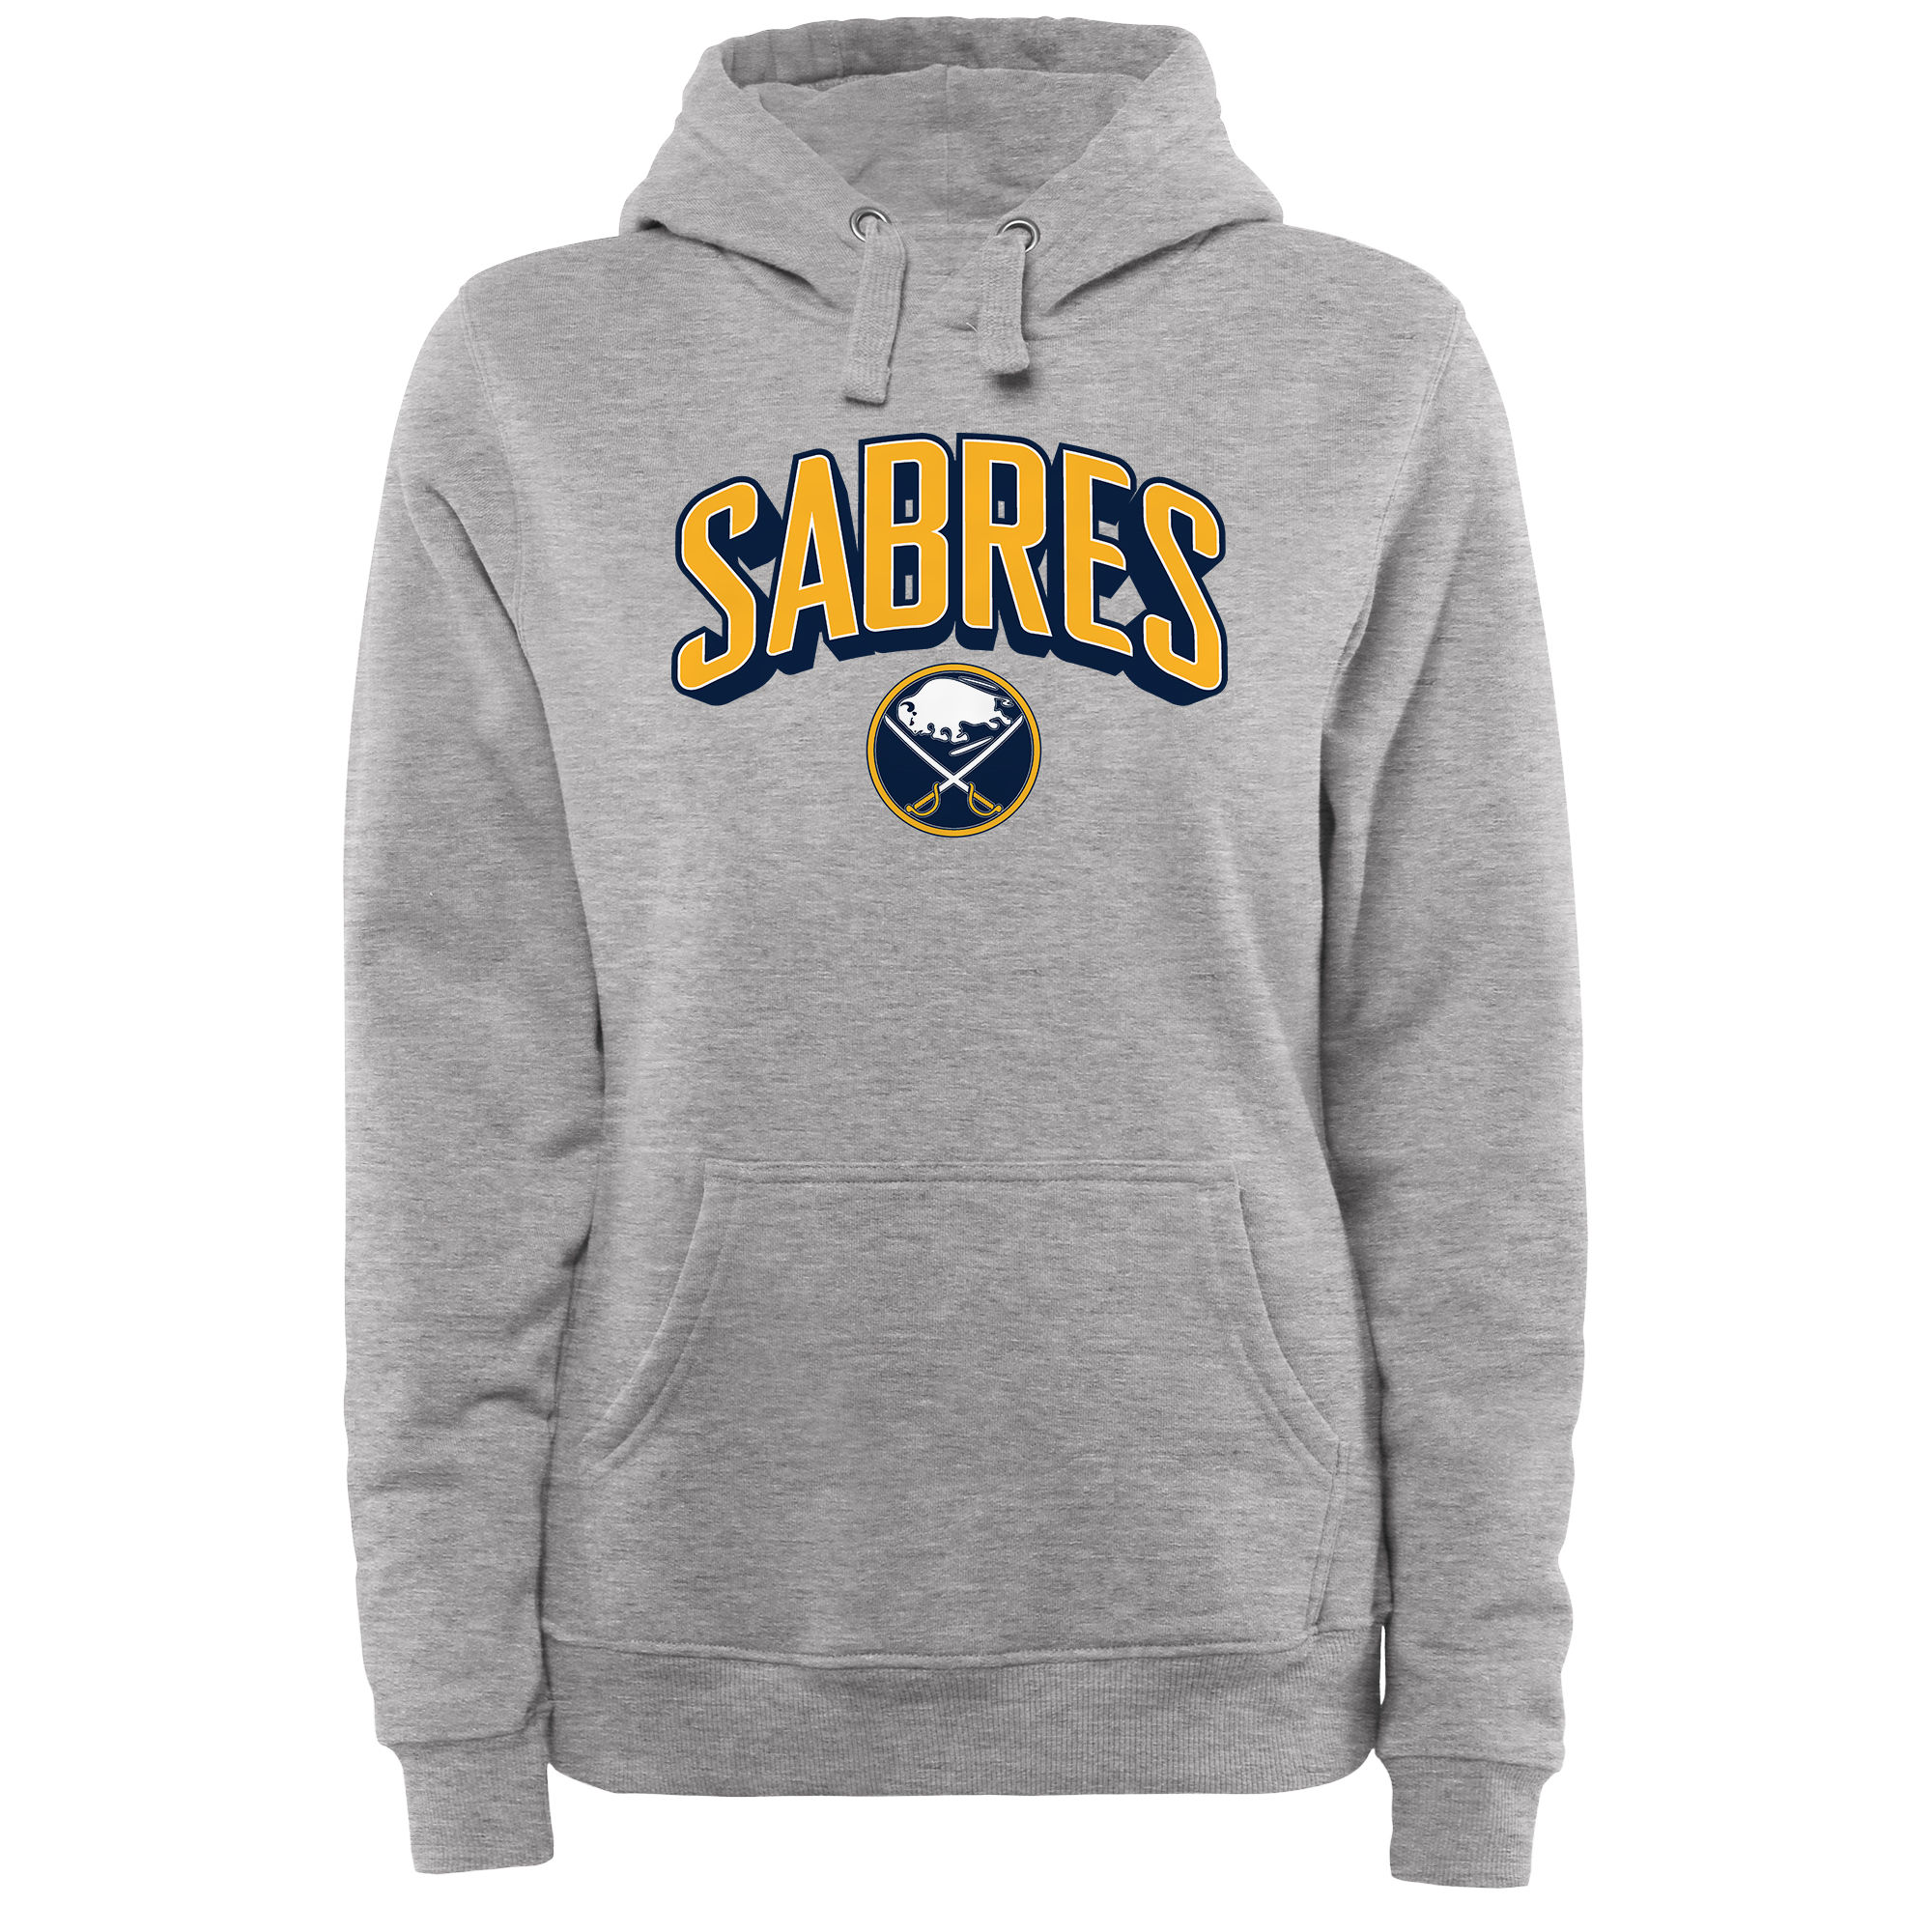 Sabres Gray Women's Customized All Stitched Hooded Sweatshirt